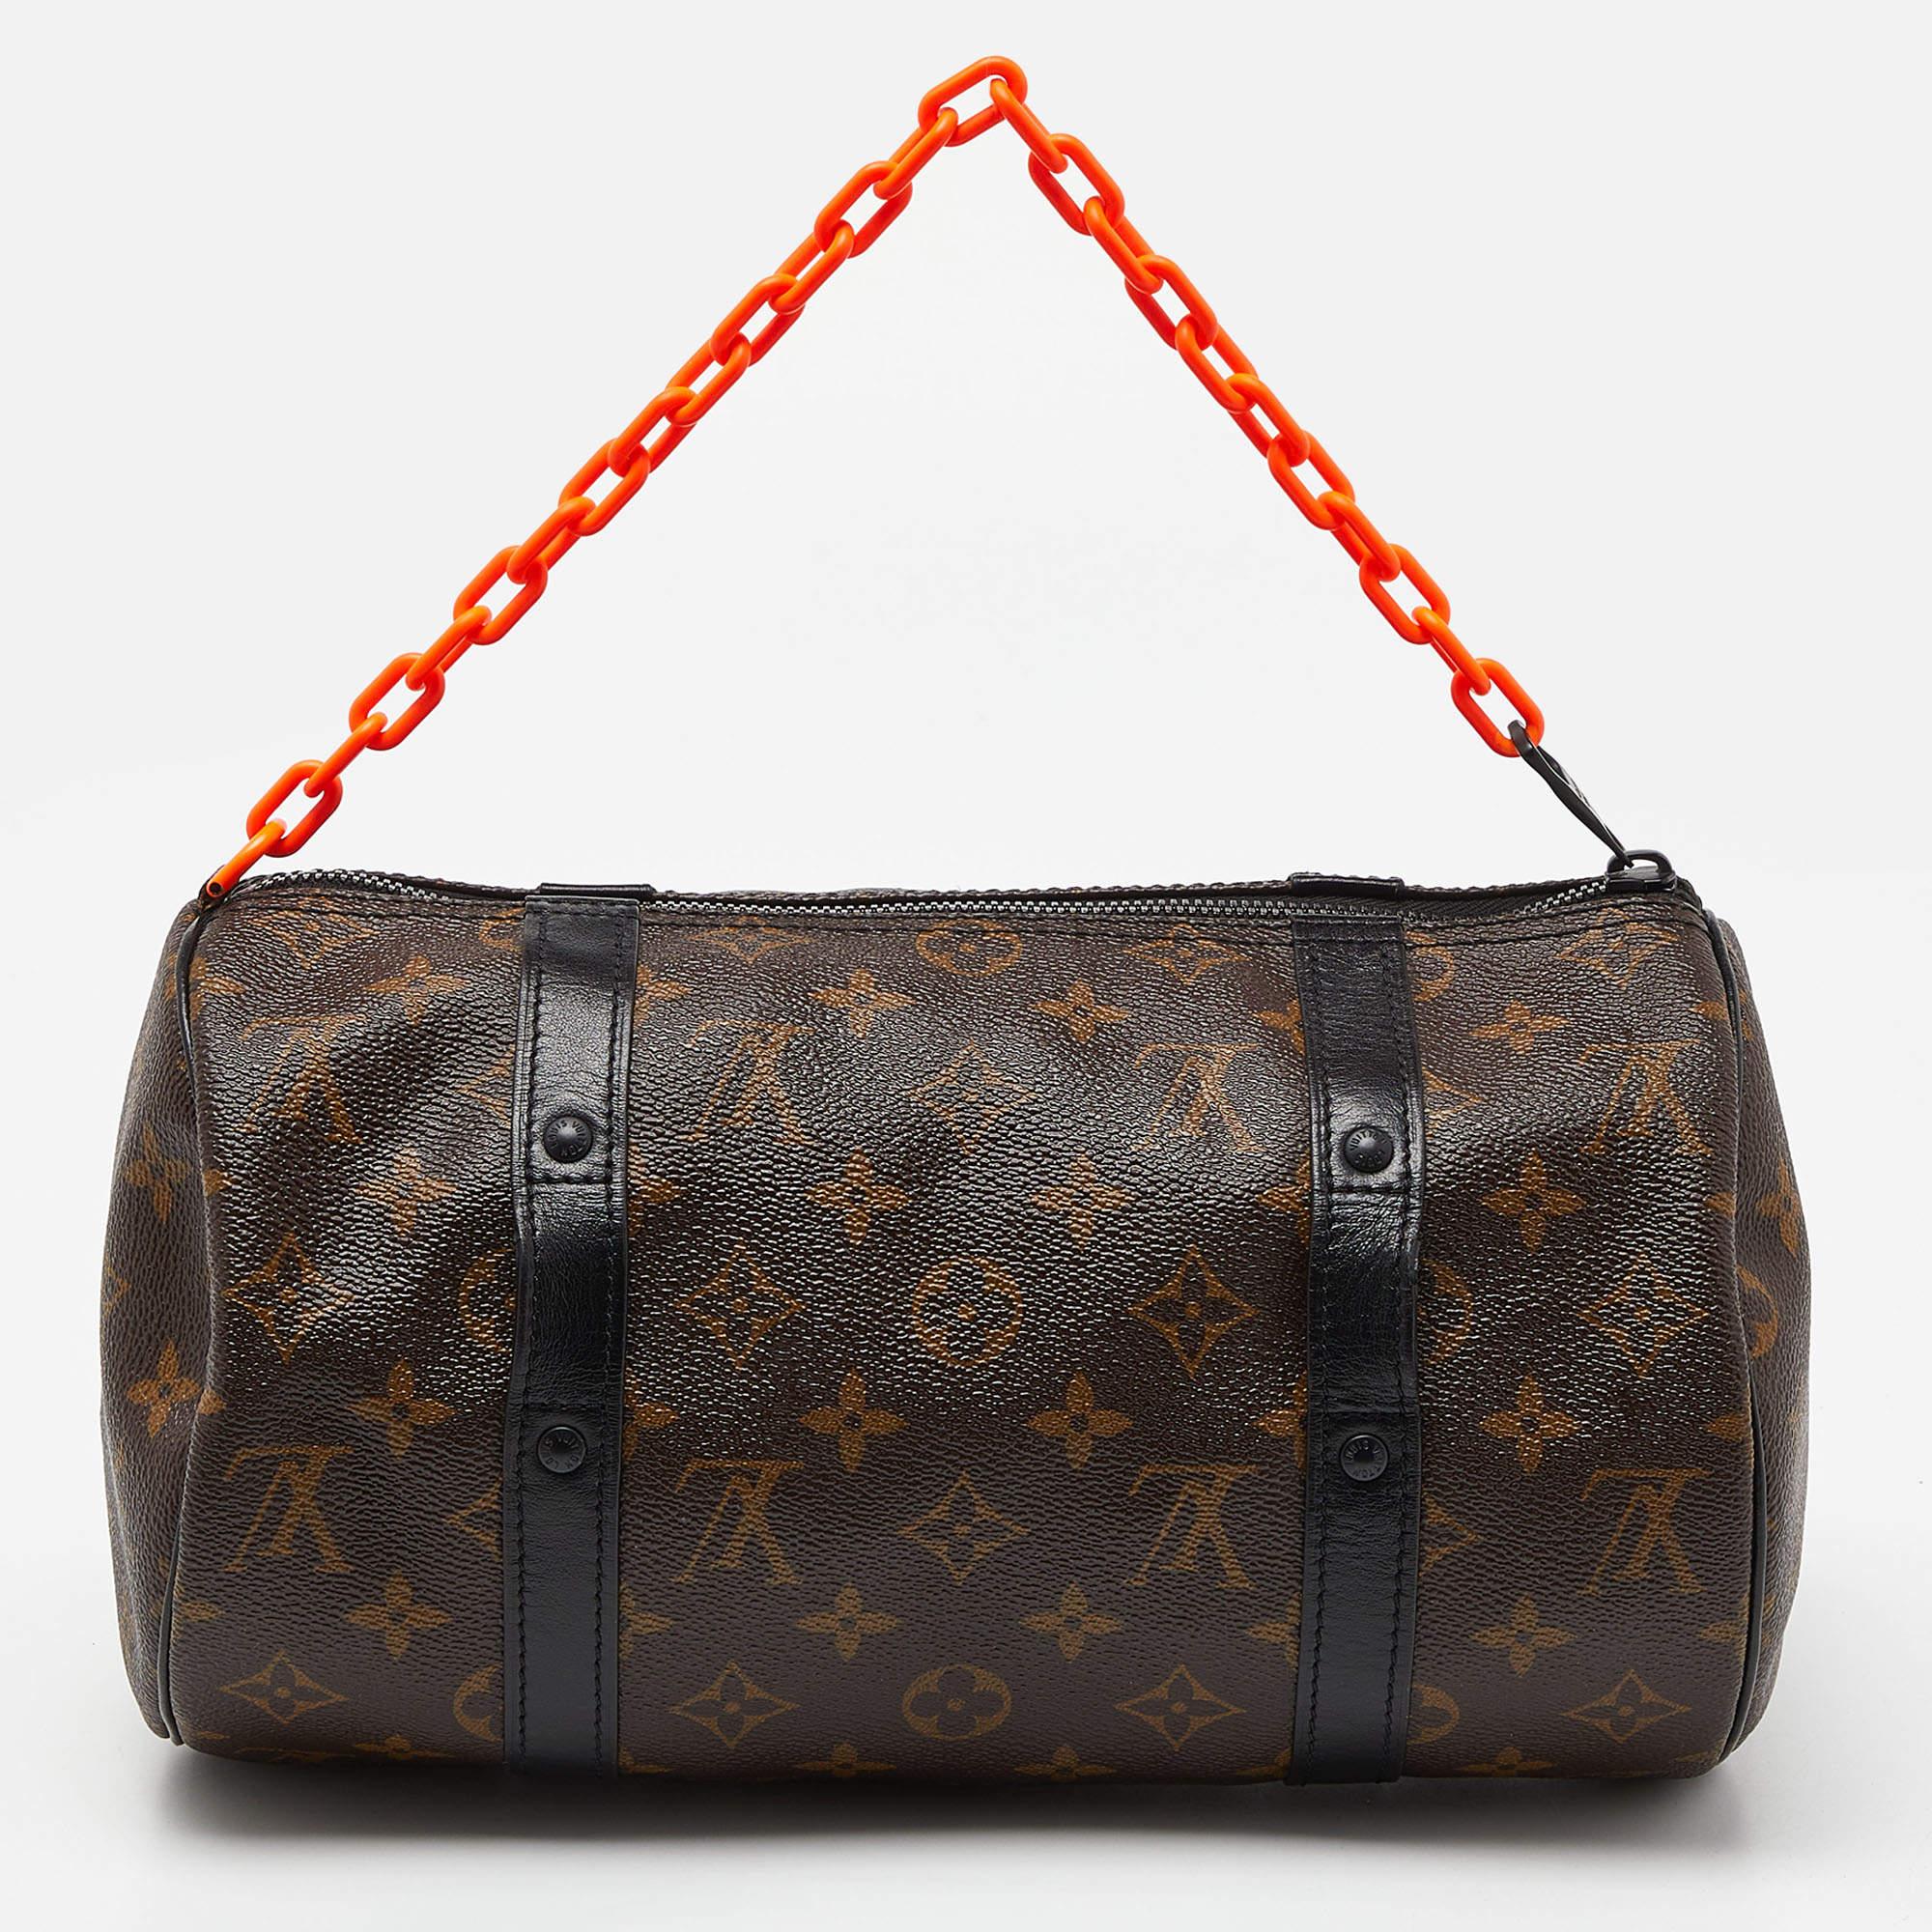 The Louis Vuitton Papillon Bag is a luxurious and iconic accessory featuring the brand's signature monogram canvas adorned with an orange chain-link strap. This compact handbag showcases a classic rounded silhouette, black-tone hardware, and a